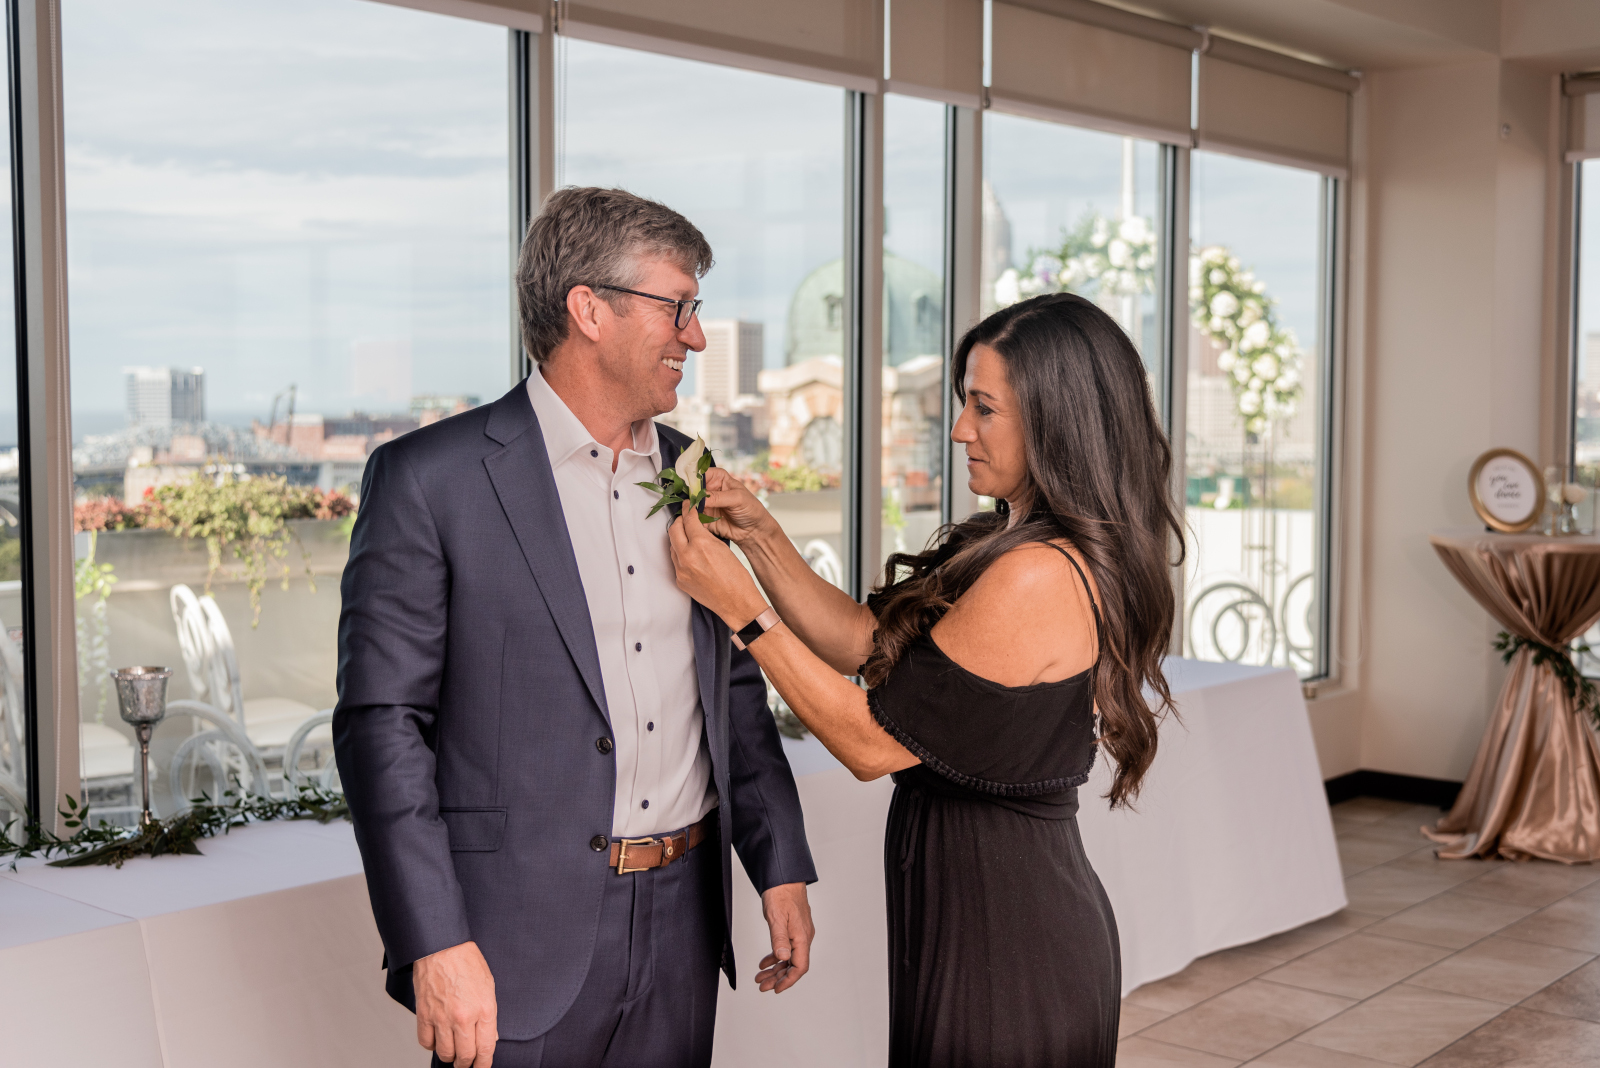 Groom getting ready, wedding preparation, candid wedding photo, smile, sweet, older groom, older couple, romantic outdoor urban wedding ceremony at Penthouse Events, Ohio City, Cleveland flats, downtown Cleveland skyline